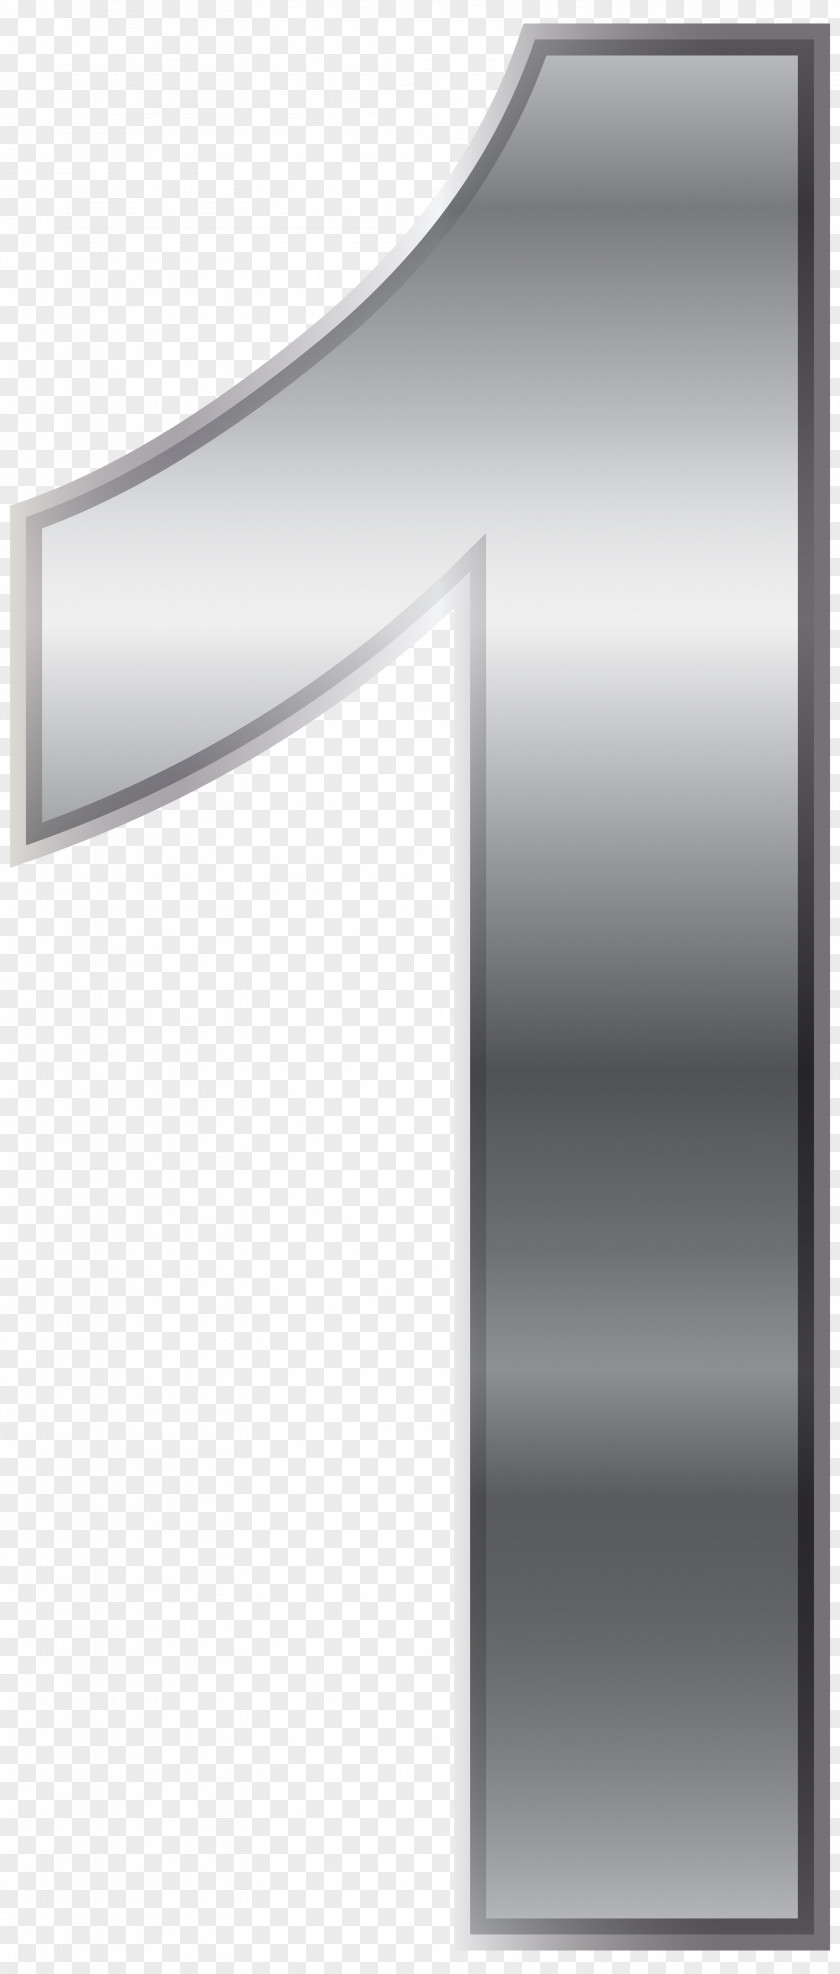 Silver Number One Transparent Clip Art Image Black And White Design Angle Pattern PNG